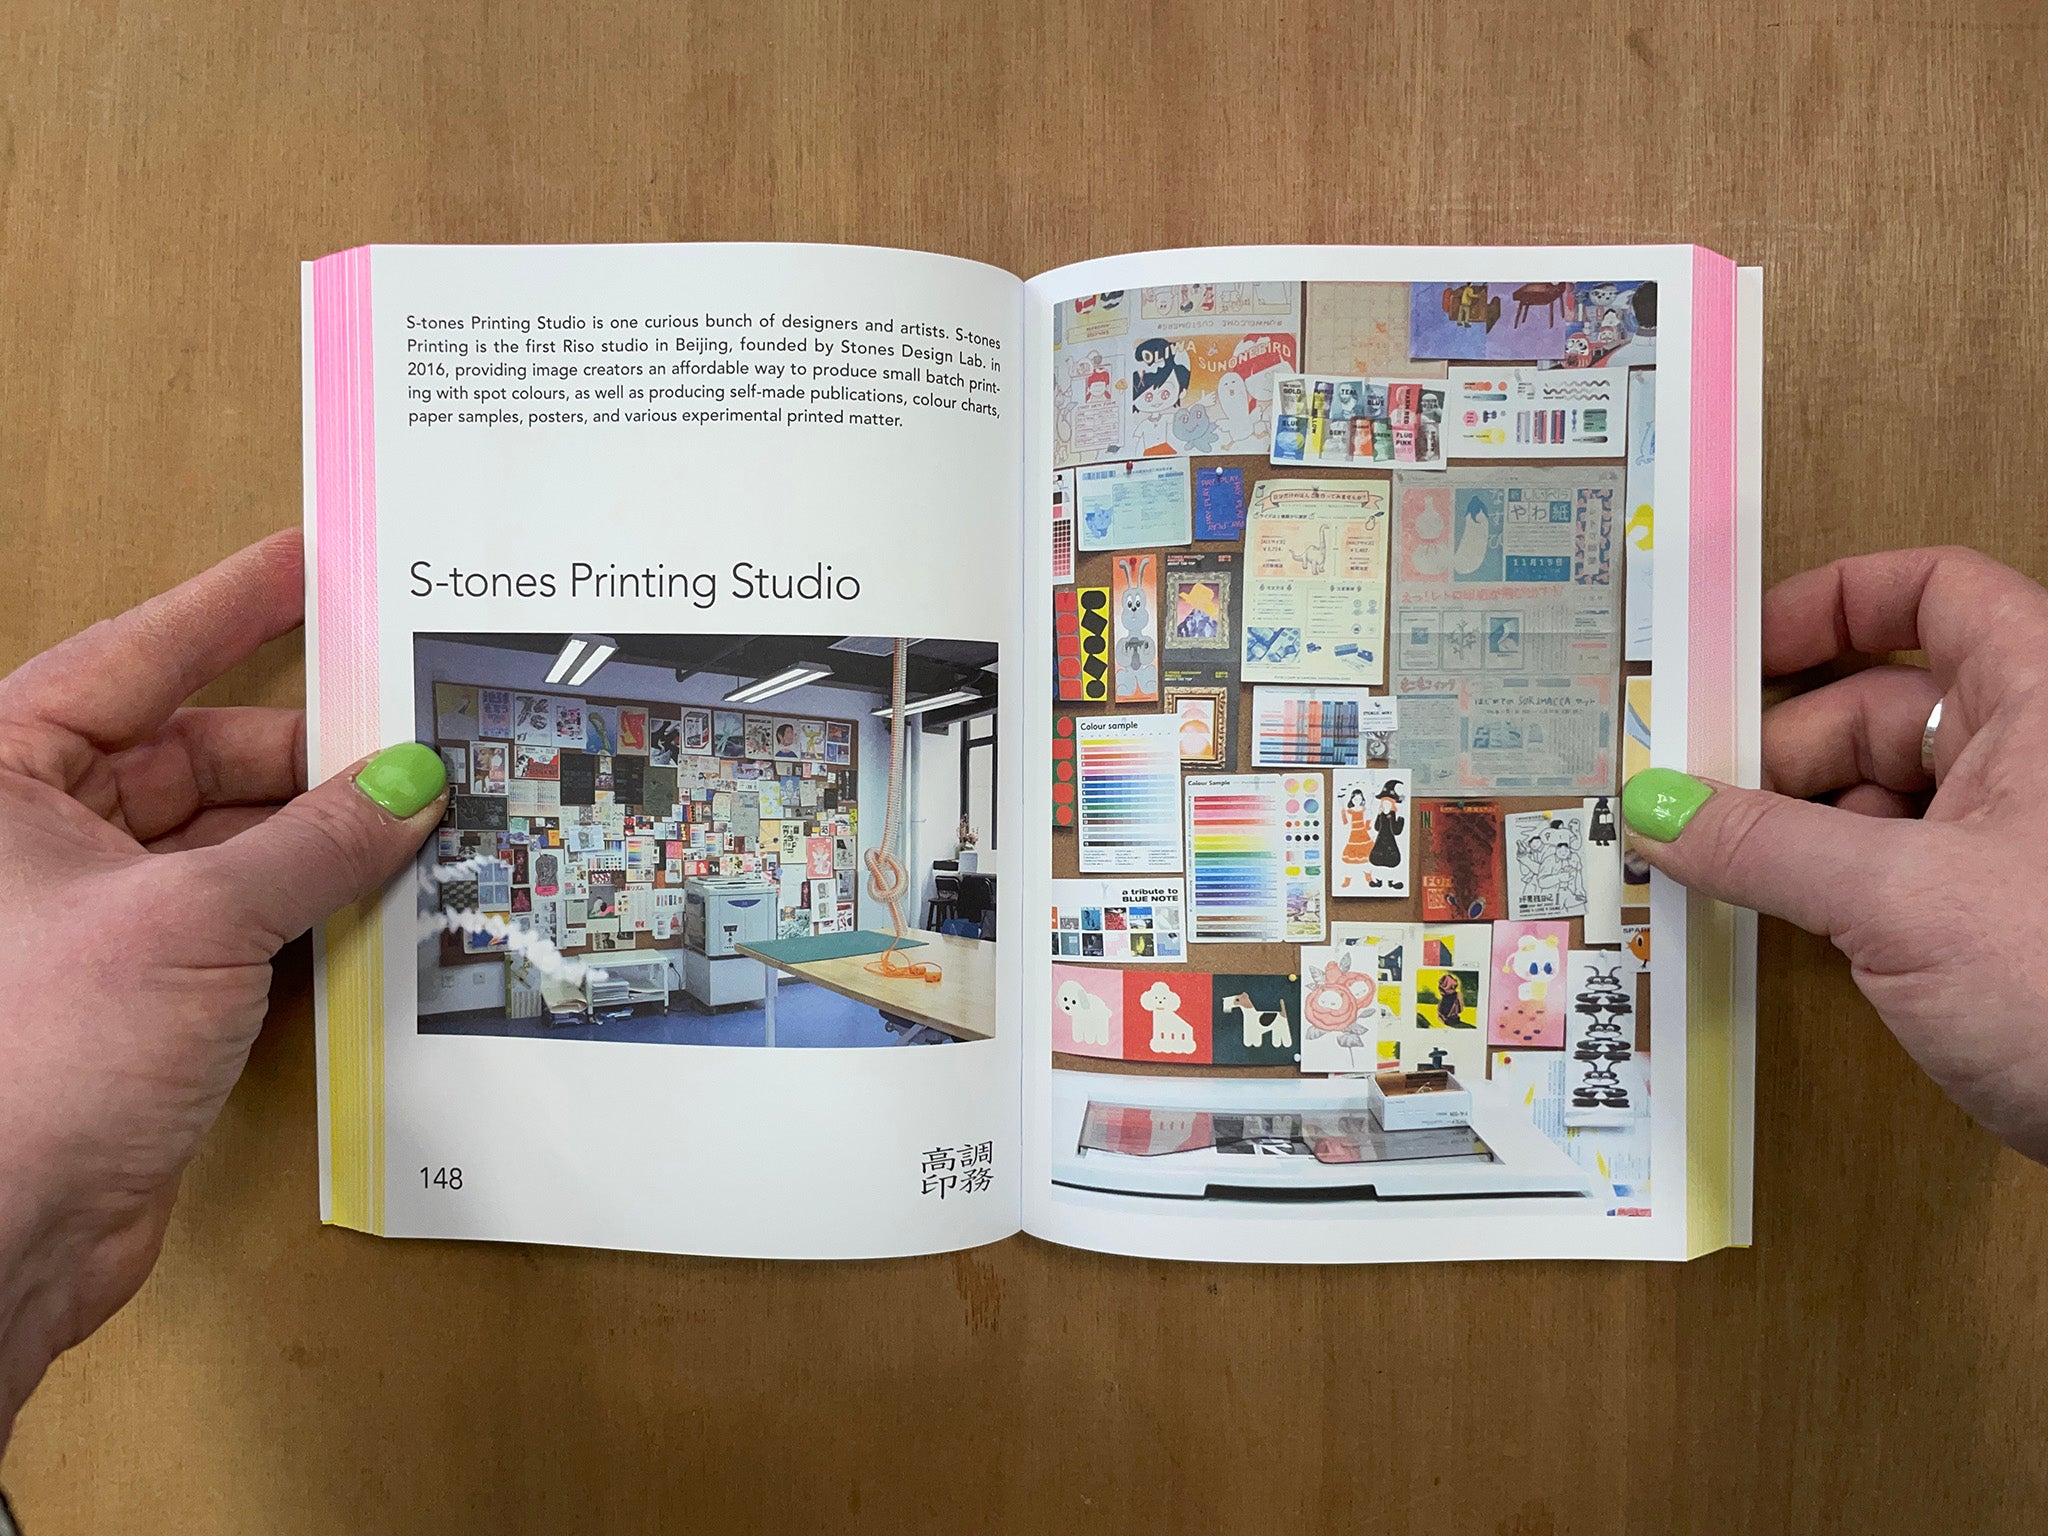 RISO ART: A CREATIVE'S GUIDE TO MASTERING RISOGRAPHY by Vivian Toh & Jay Lim